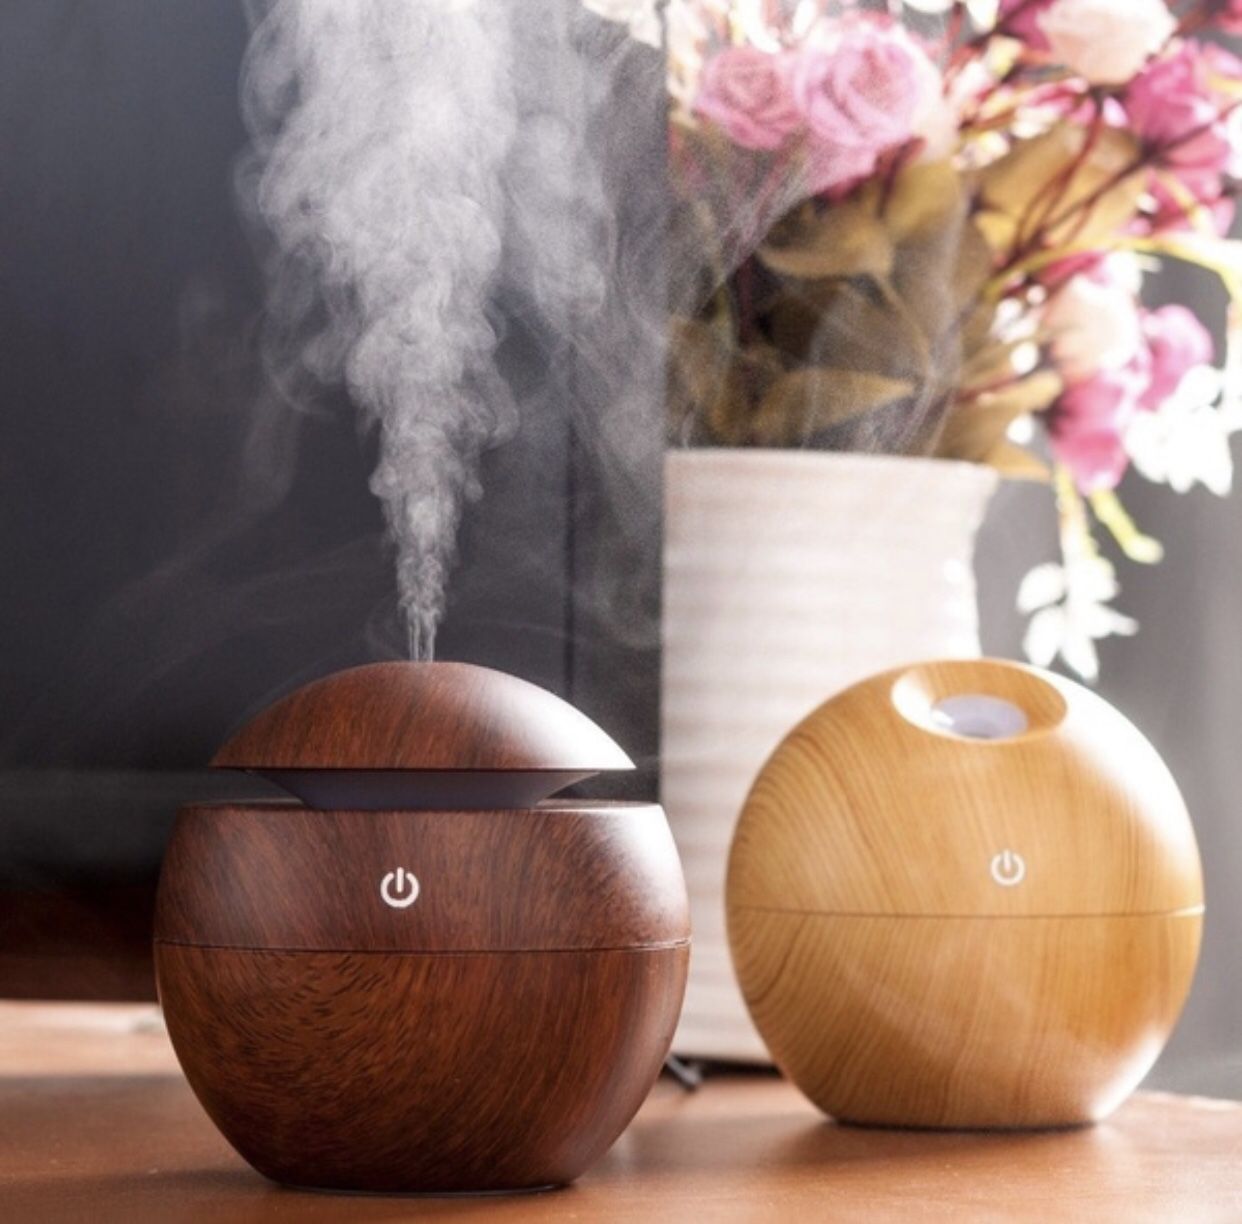 Air USB Aroma Essential Oil Diffuser Ultrasonic Cool Mist Humidifier Air Purifier And Essential Oil Humidifier for Home